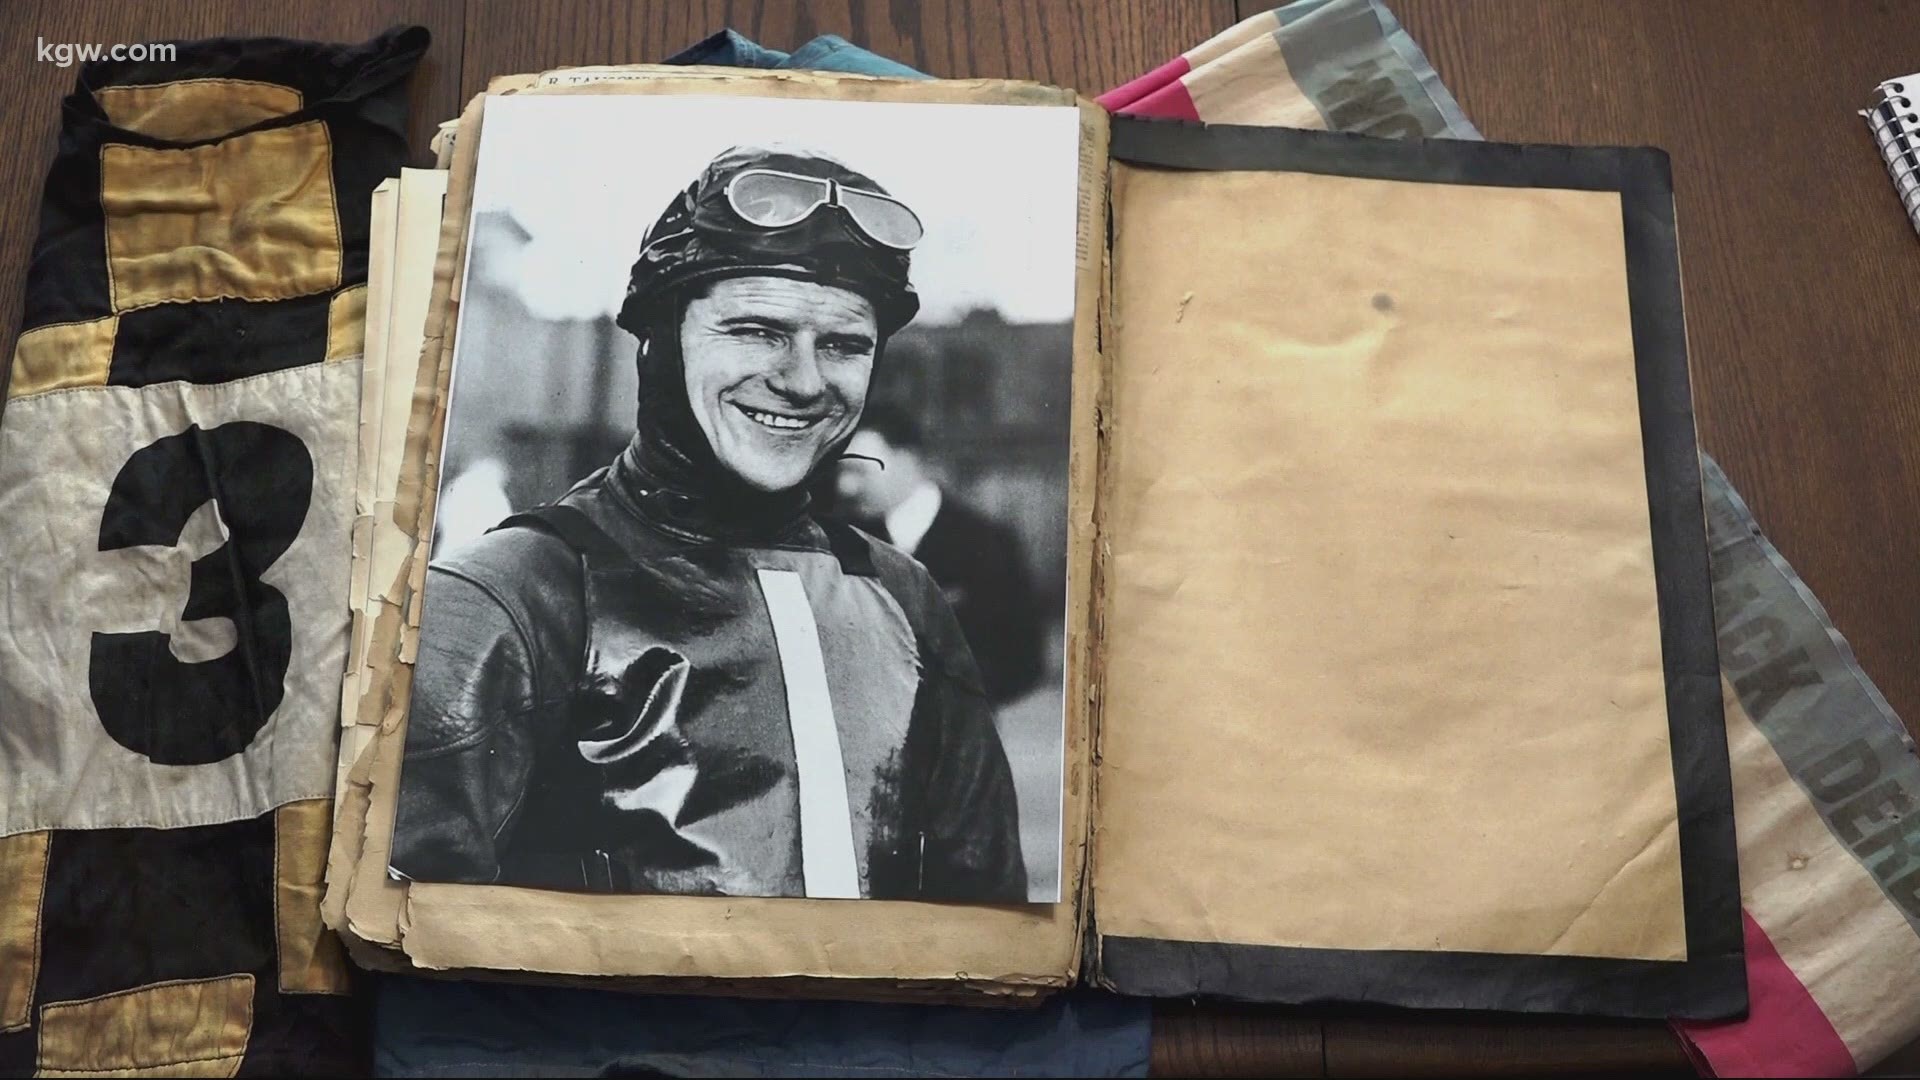 A local historic film preservation company doesn’t want a local speedway motorcycle racer to be forgotten.